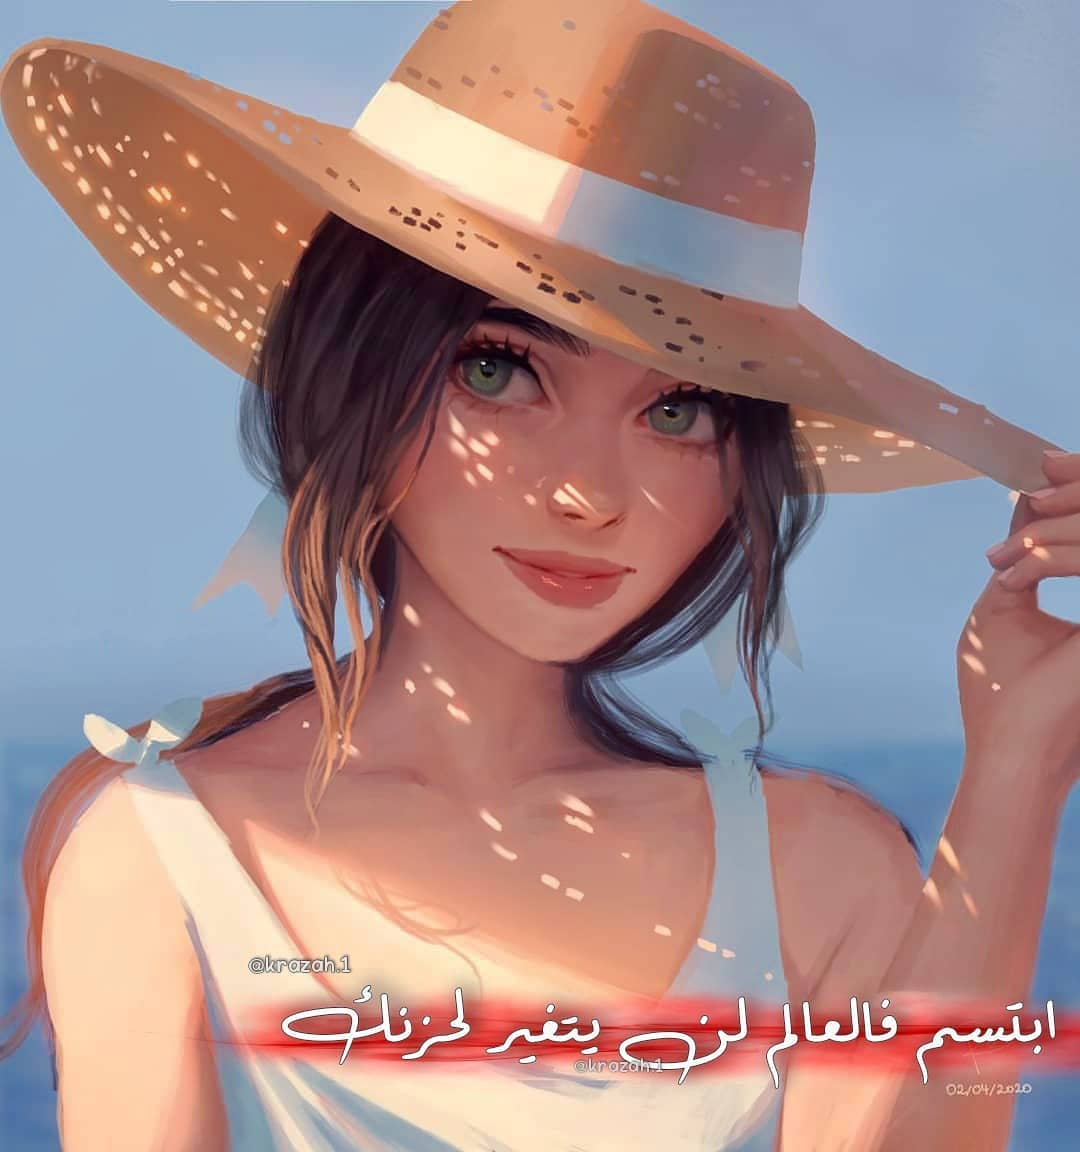 Arabic Quotes Girl DP Pic